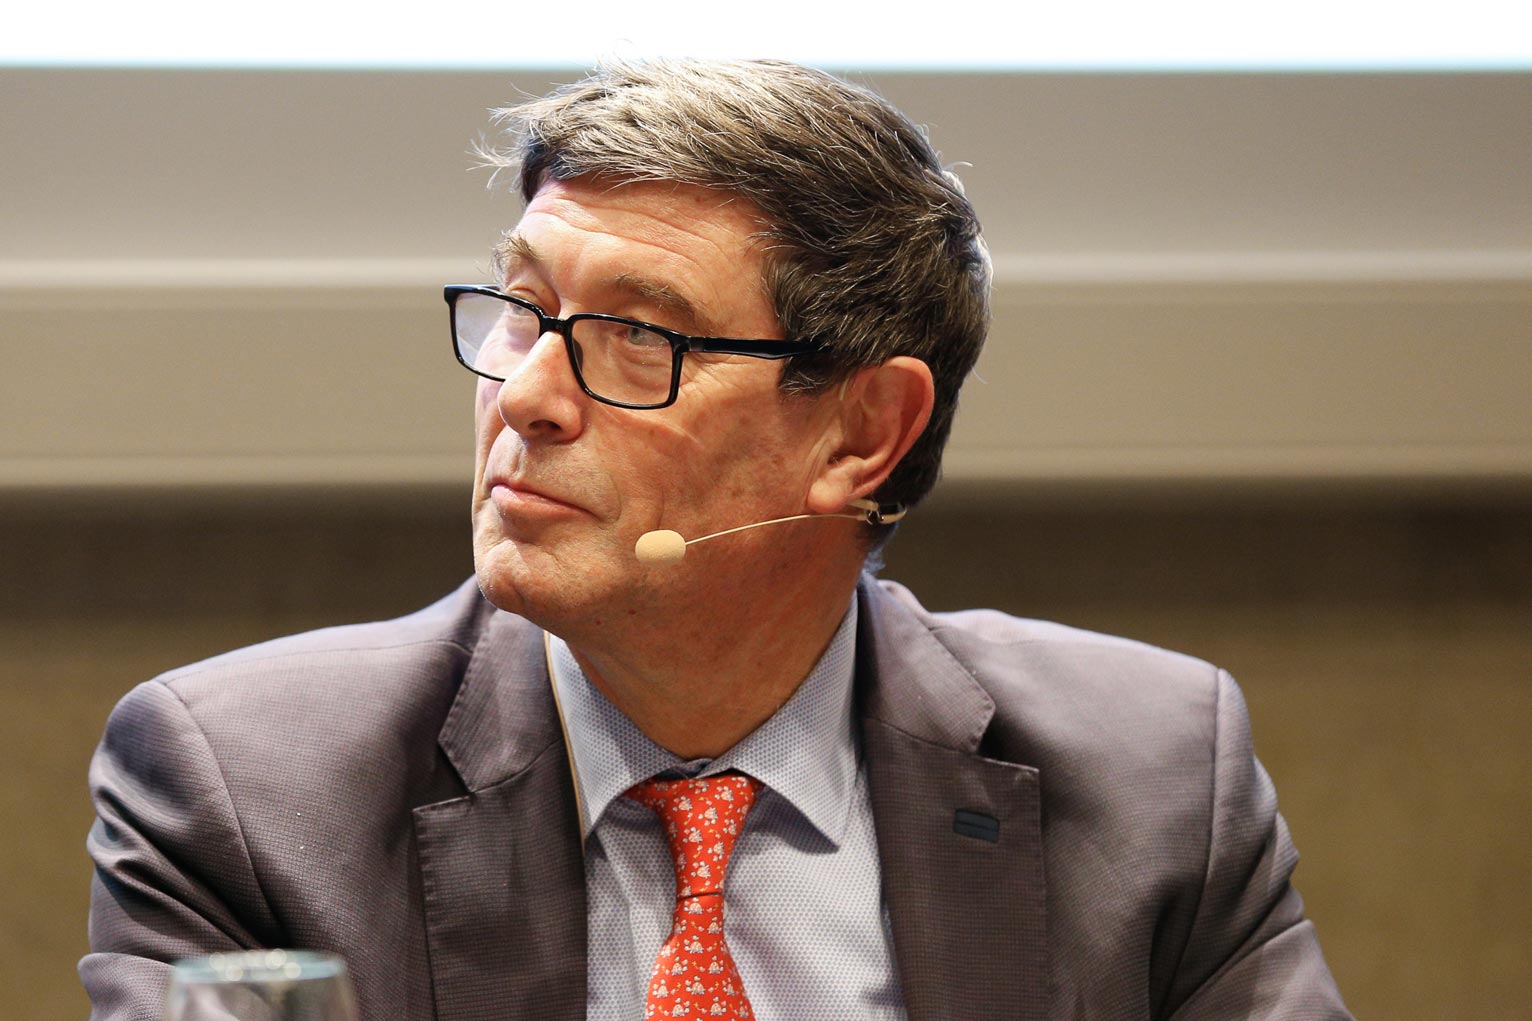 Mauro Dell’Ambrogio, former State Secretary for Education, Research and Innovation